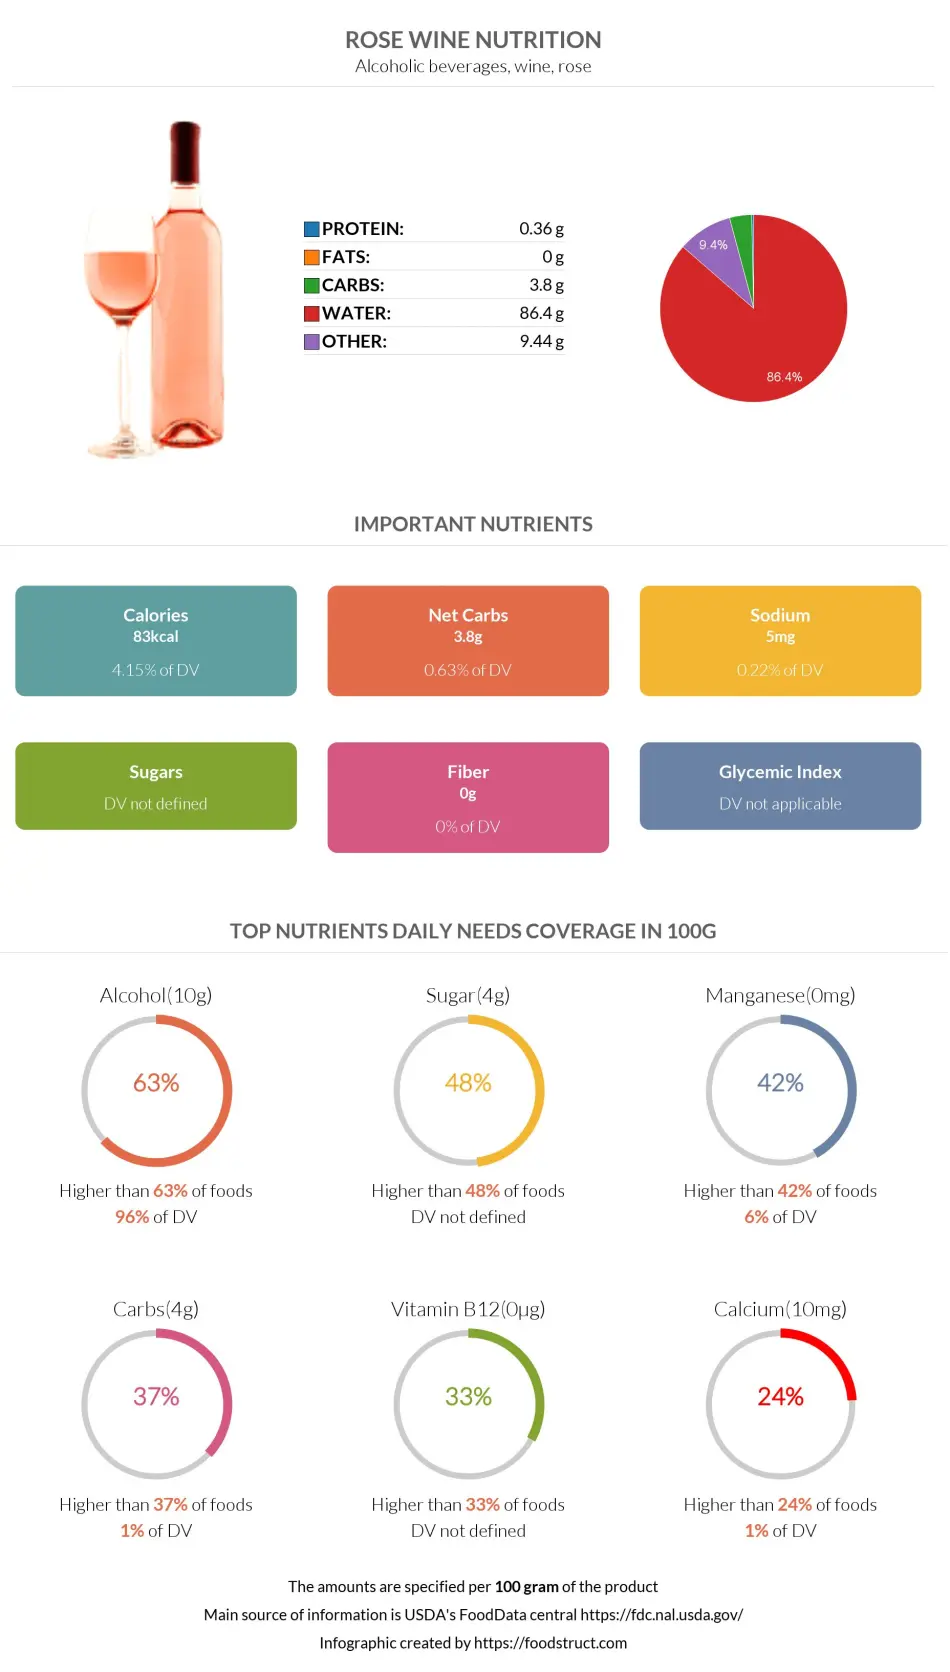 Rose wine nutrition infographic